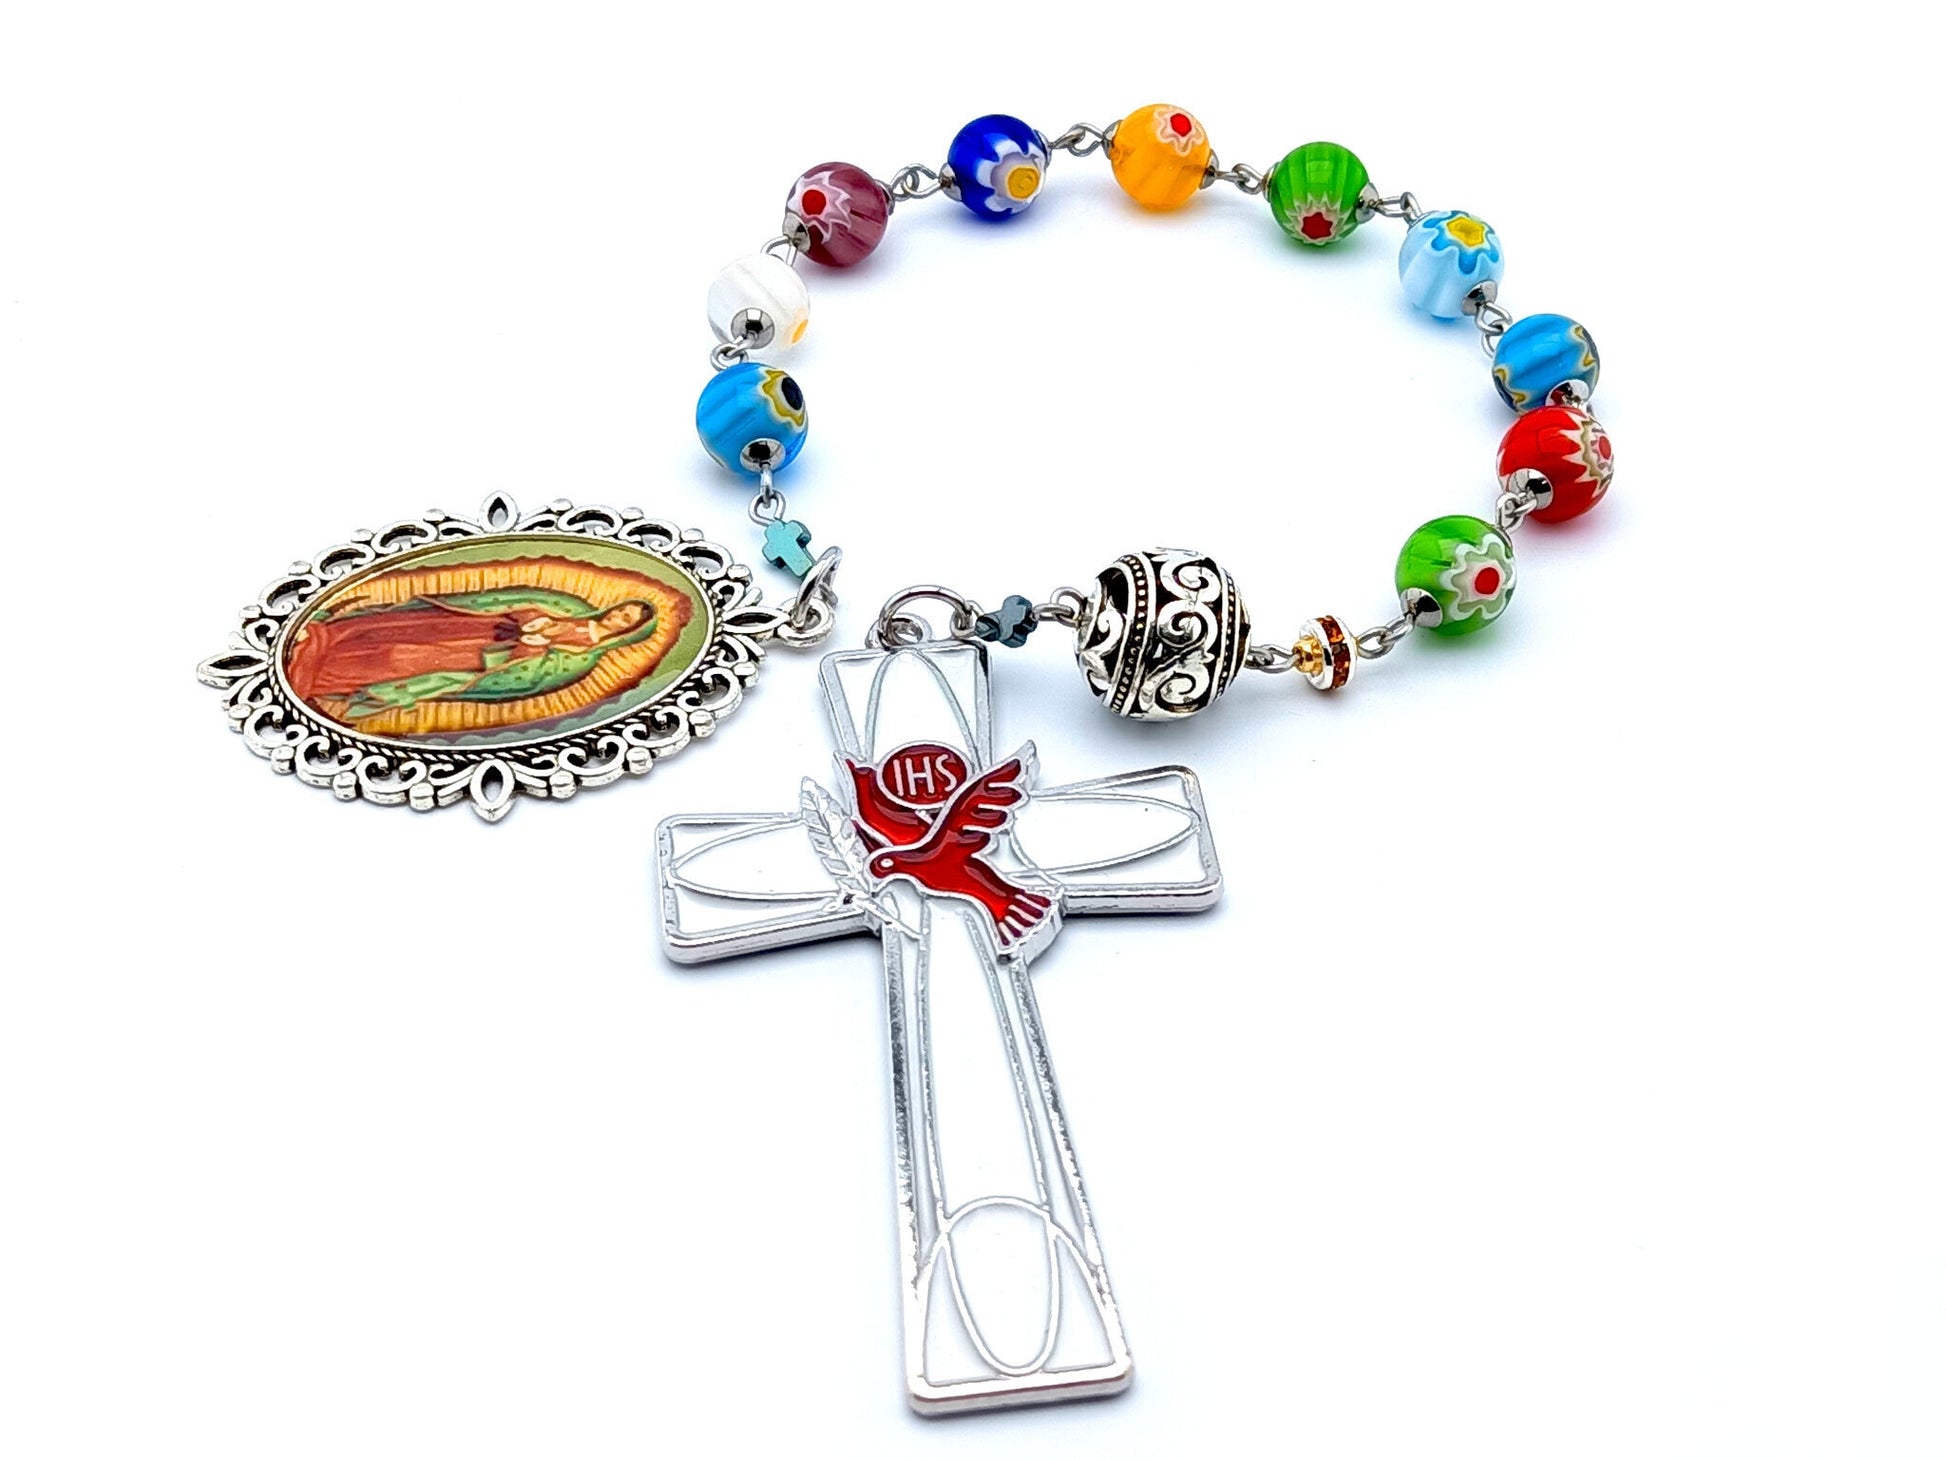 Our Lady of Guadalupe unique rosary beads single decade rosary with multicoloured millefleur glass and silevr beads, white Holy Spirit crucifix and silver poicture medal.